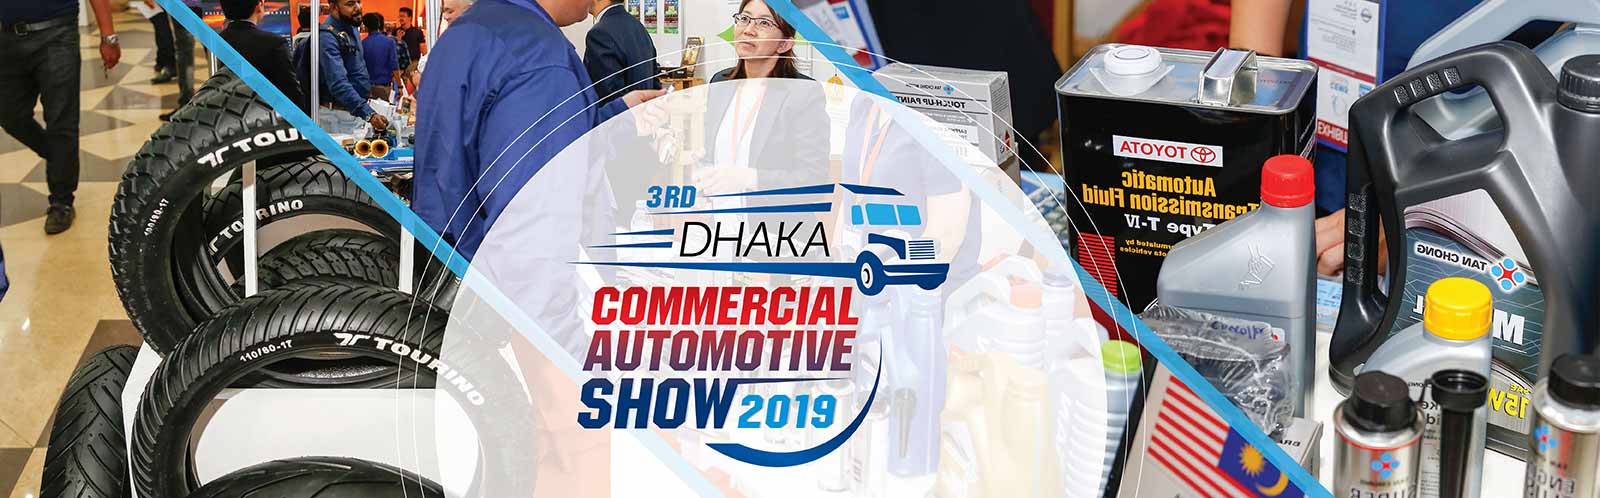  3rd Dhaka Commercial Automotive Show 2019